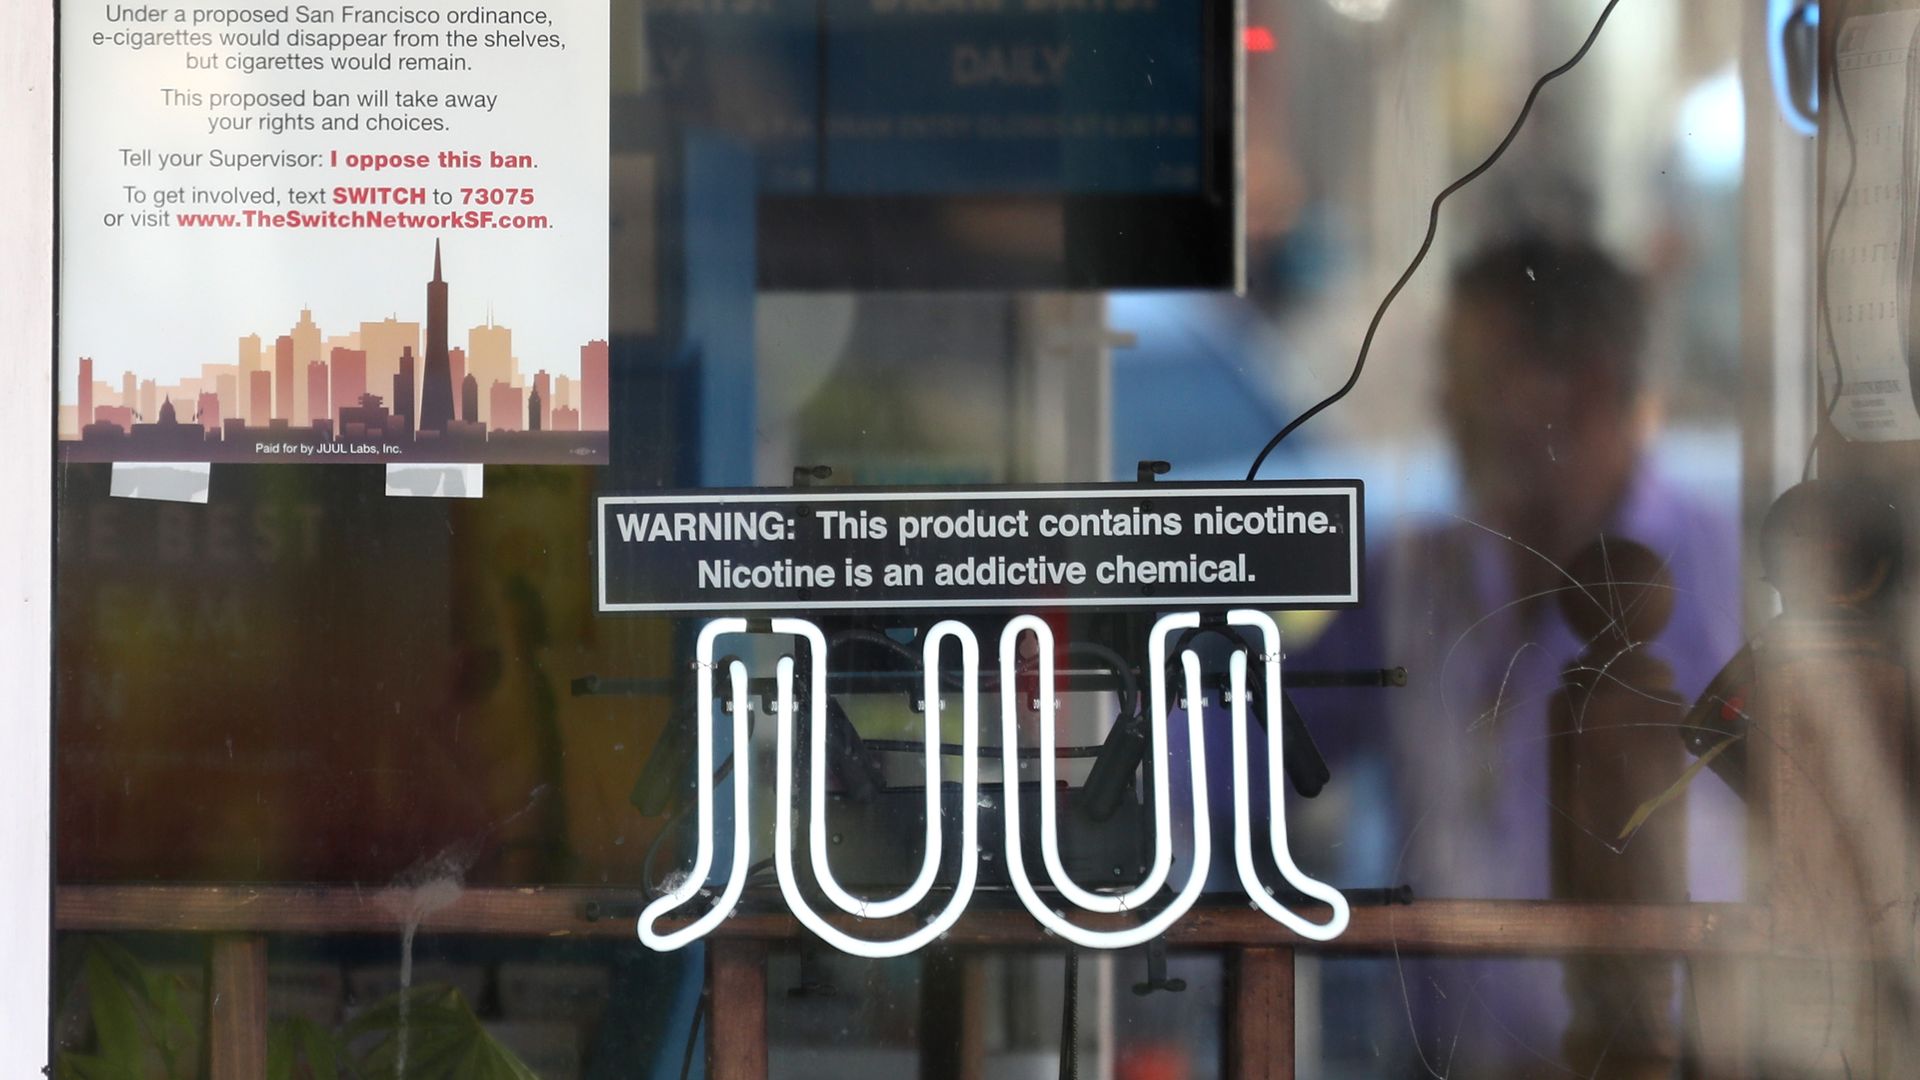 A neon sign advertising Juul e-cigarettes.